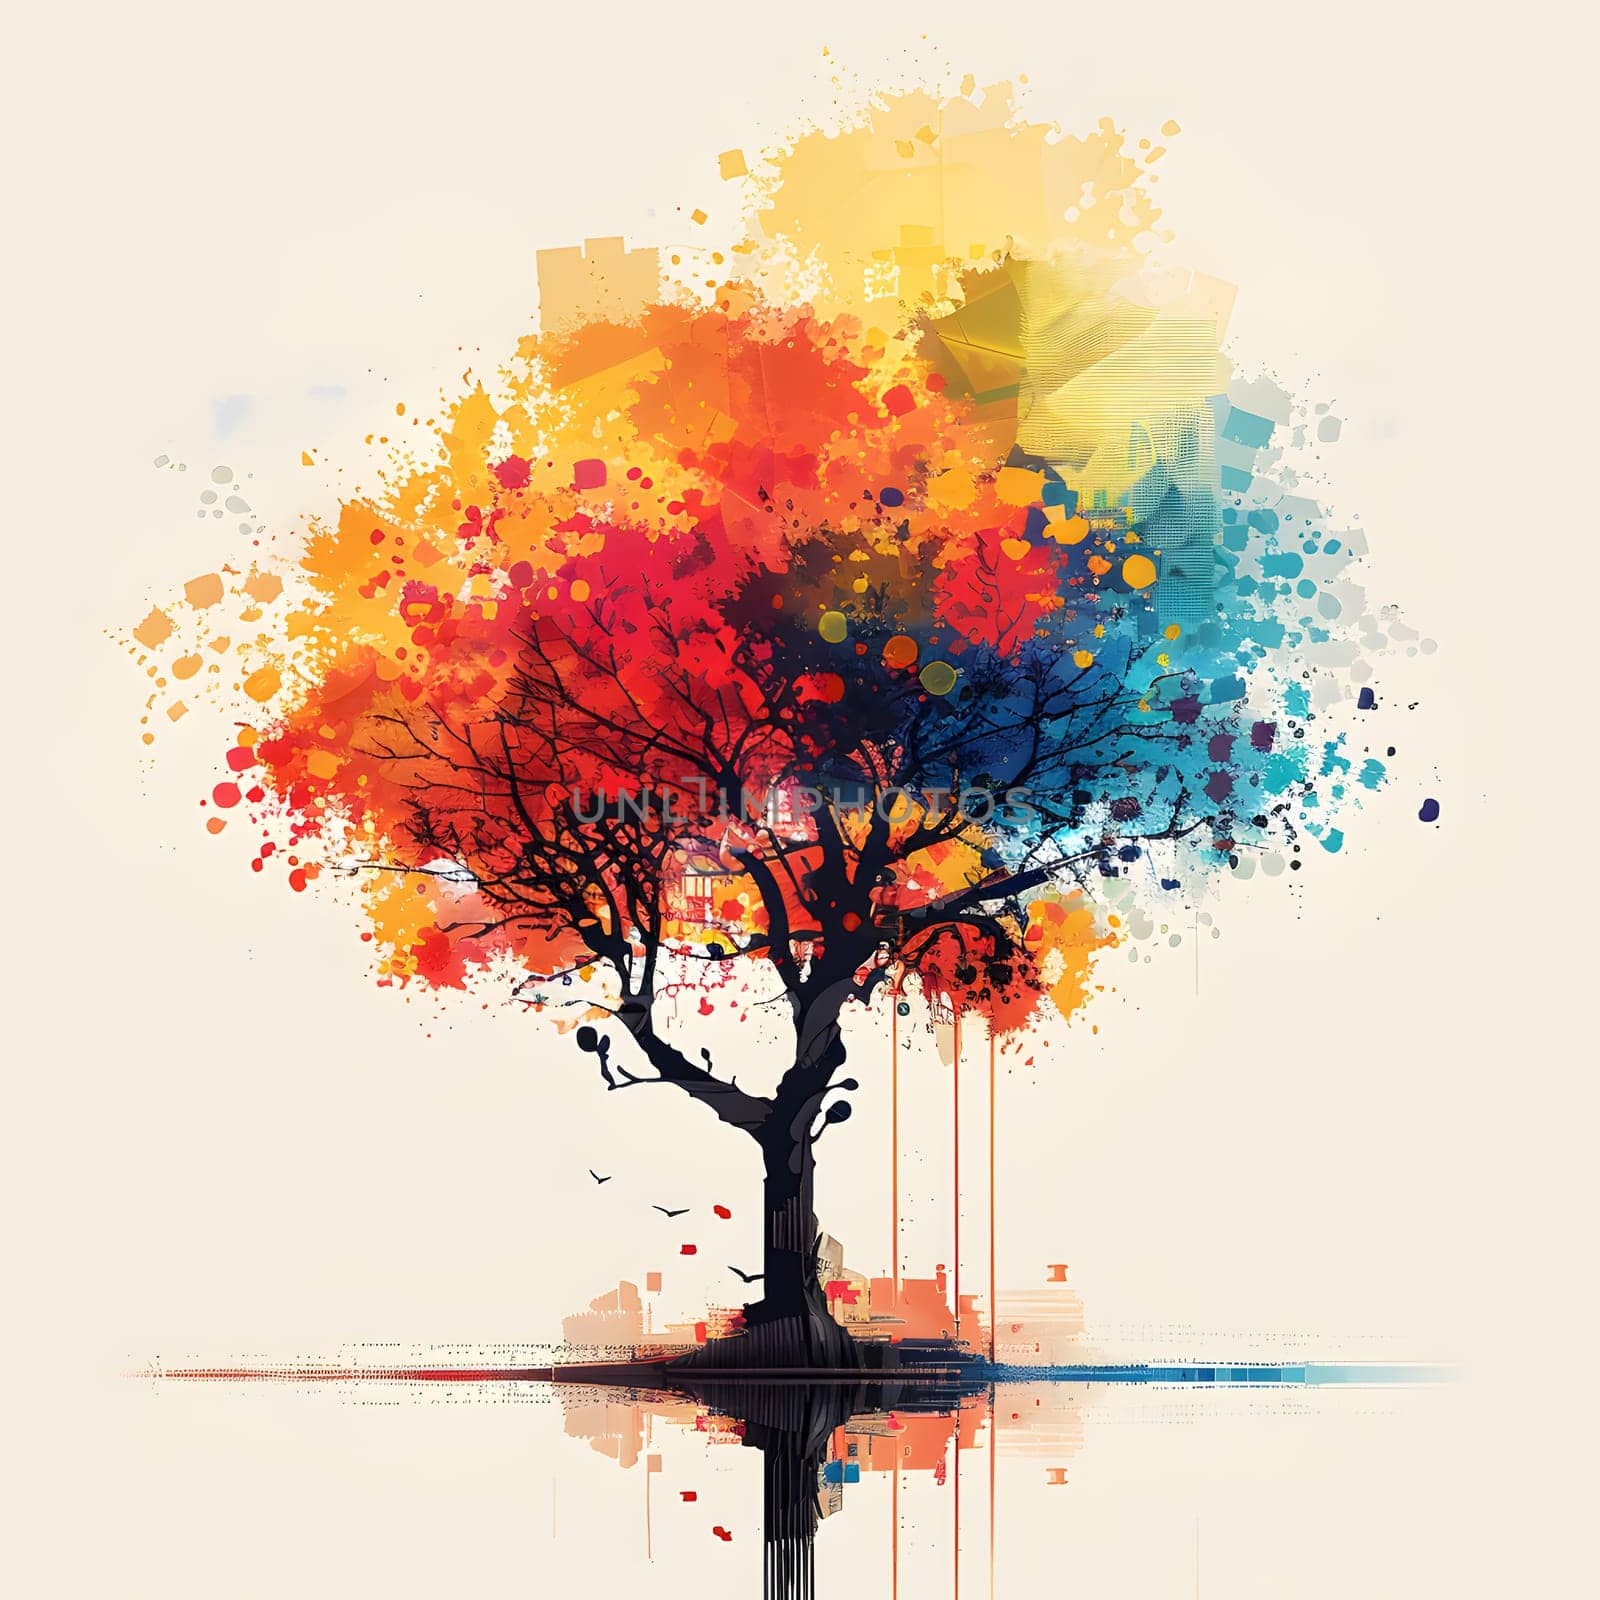 A vibrant painting of a tree with colorful leaves set against a white background, capturing the beauty of nature through art and tints and shades